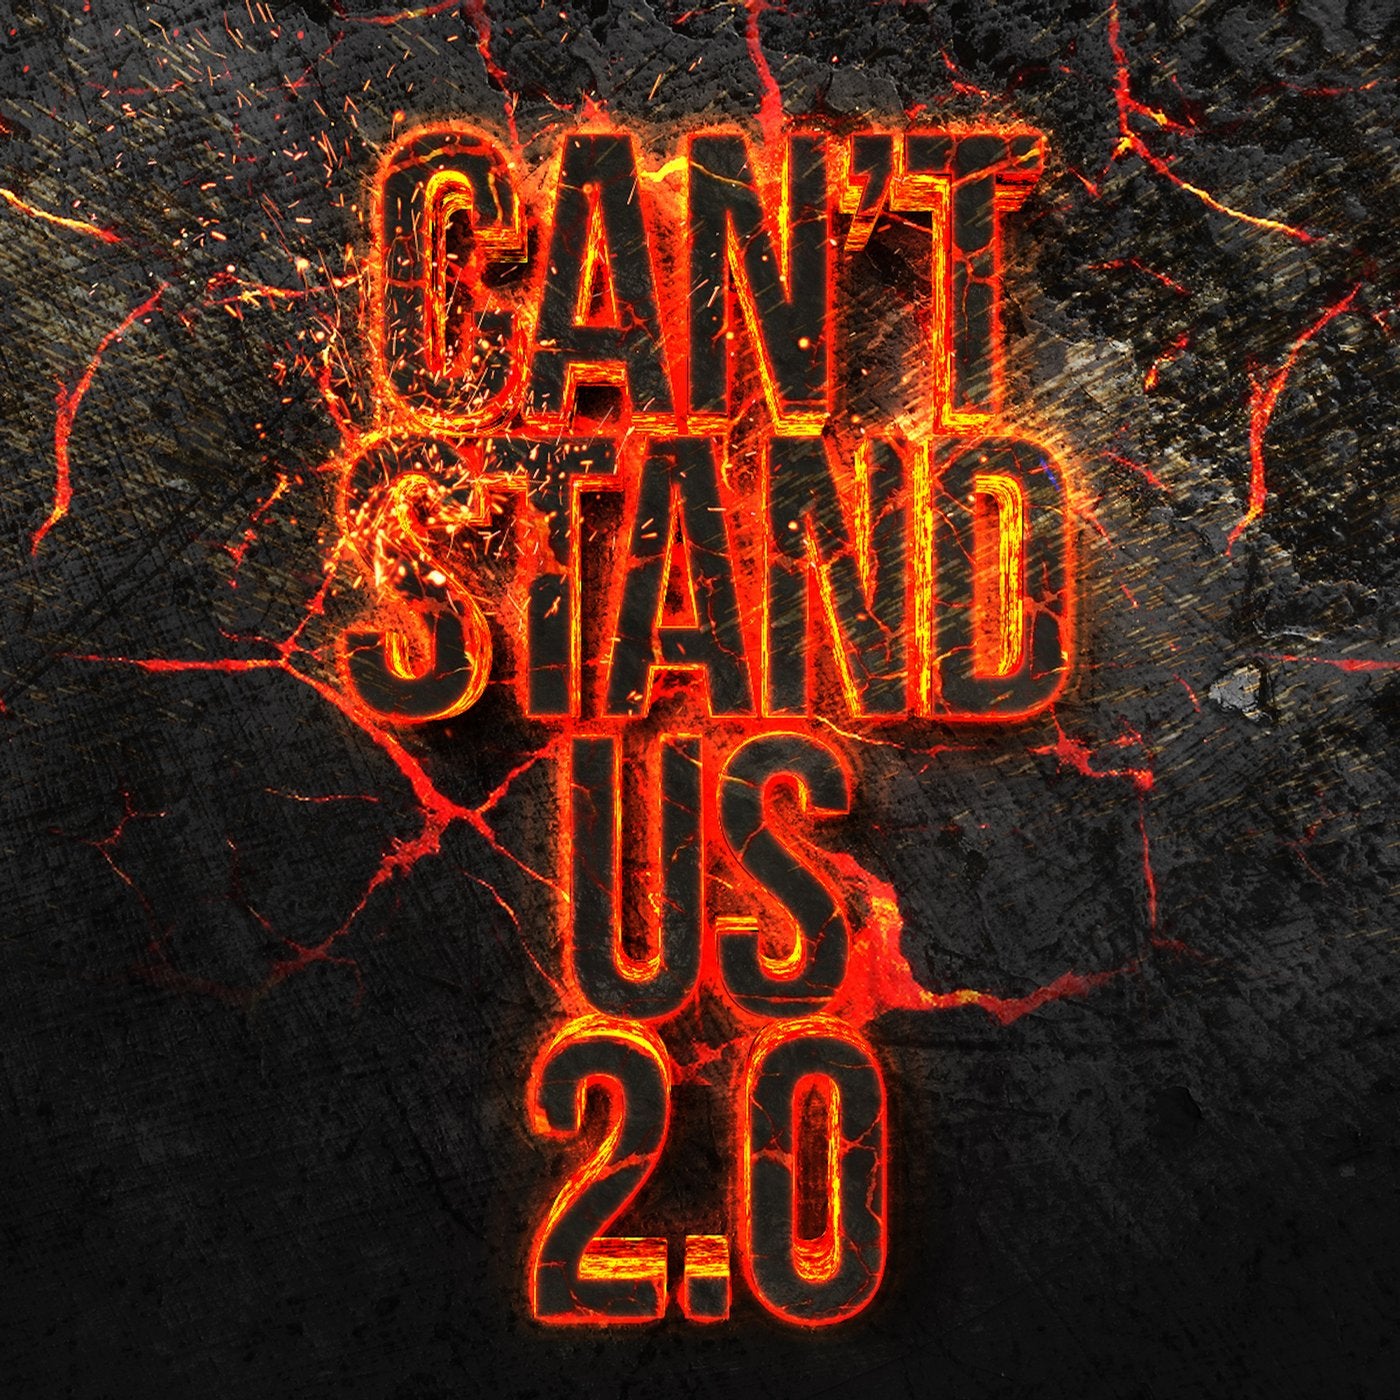 Can't Stand Us 2.0 (feat. French Montana)